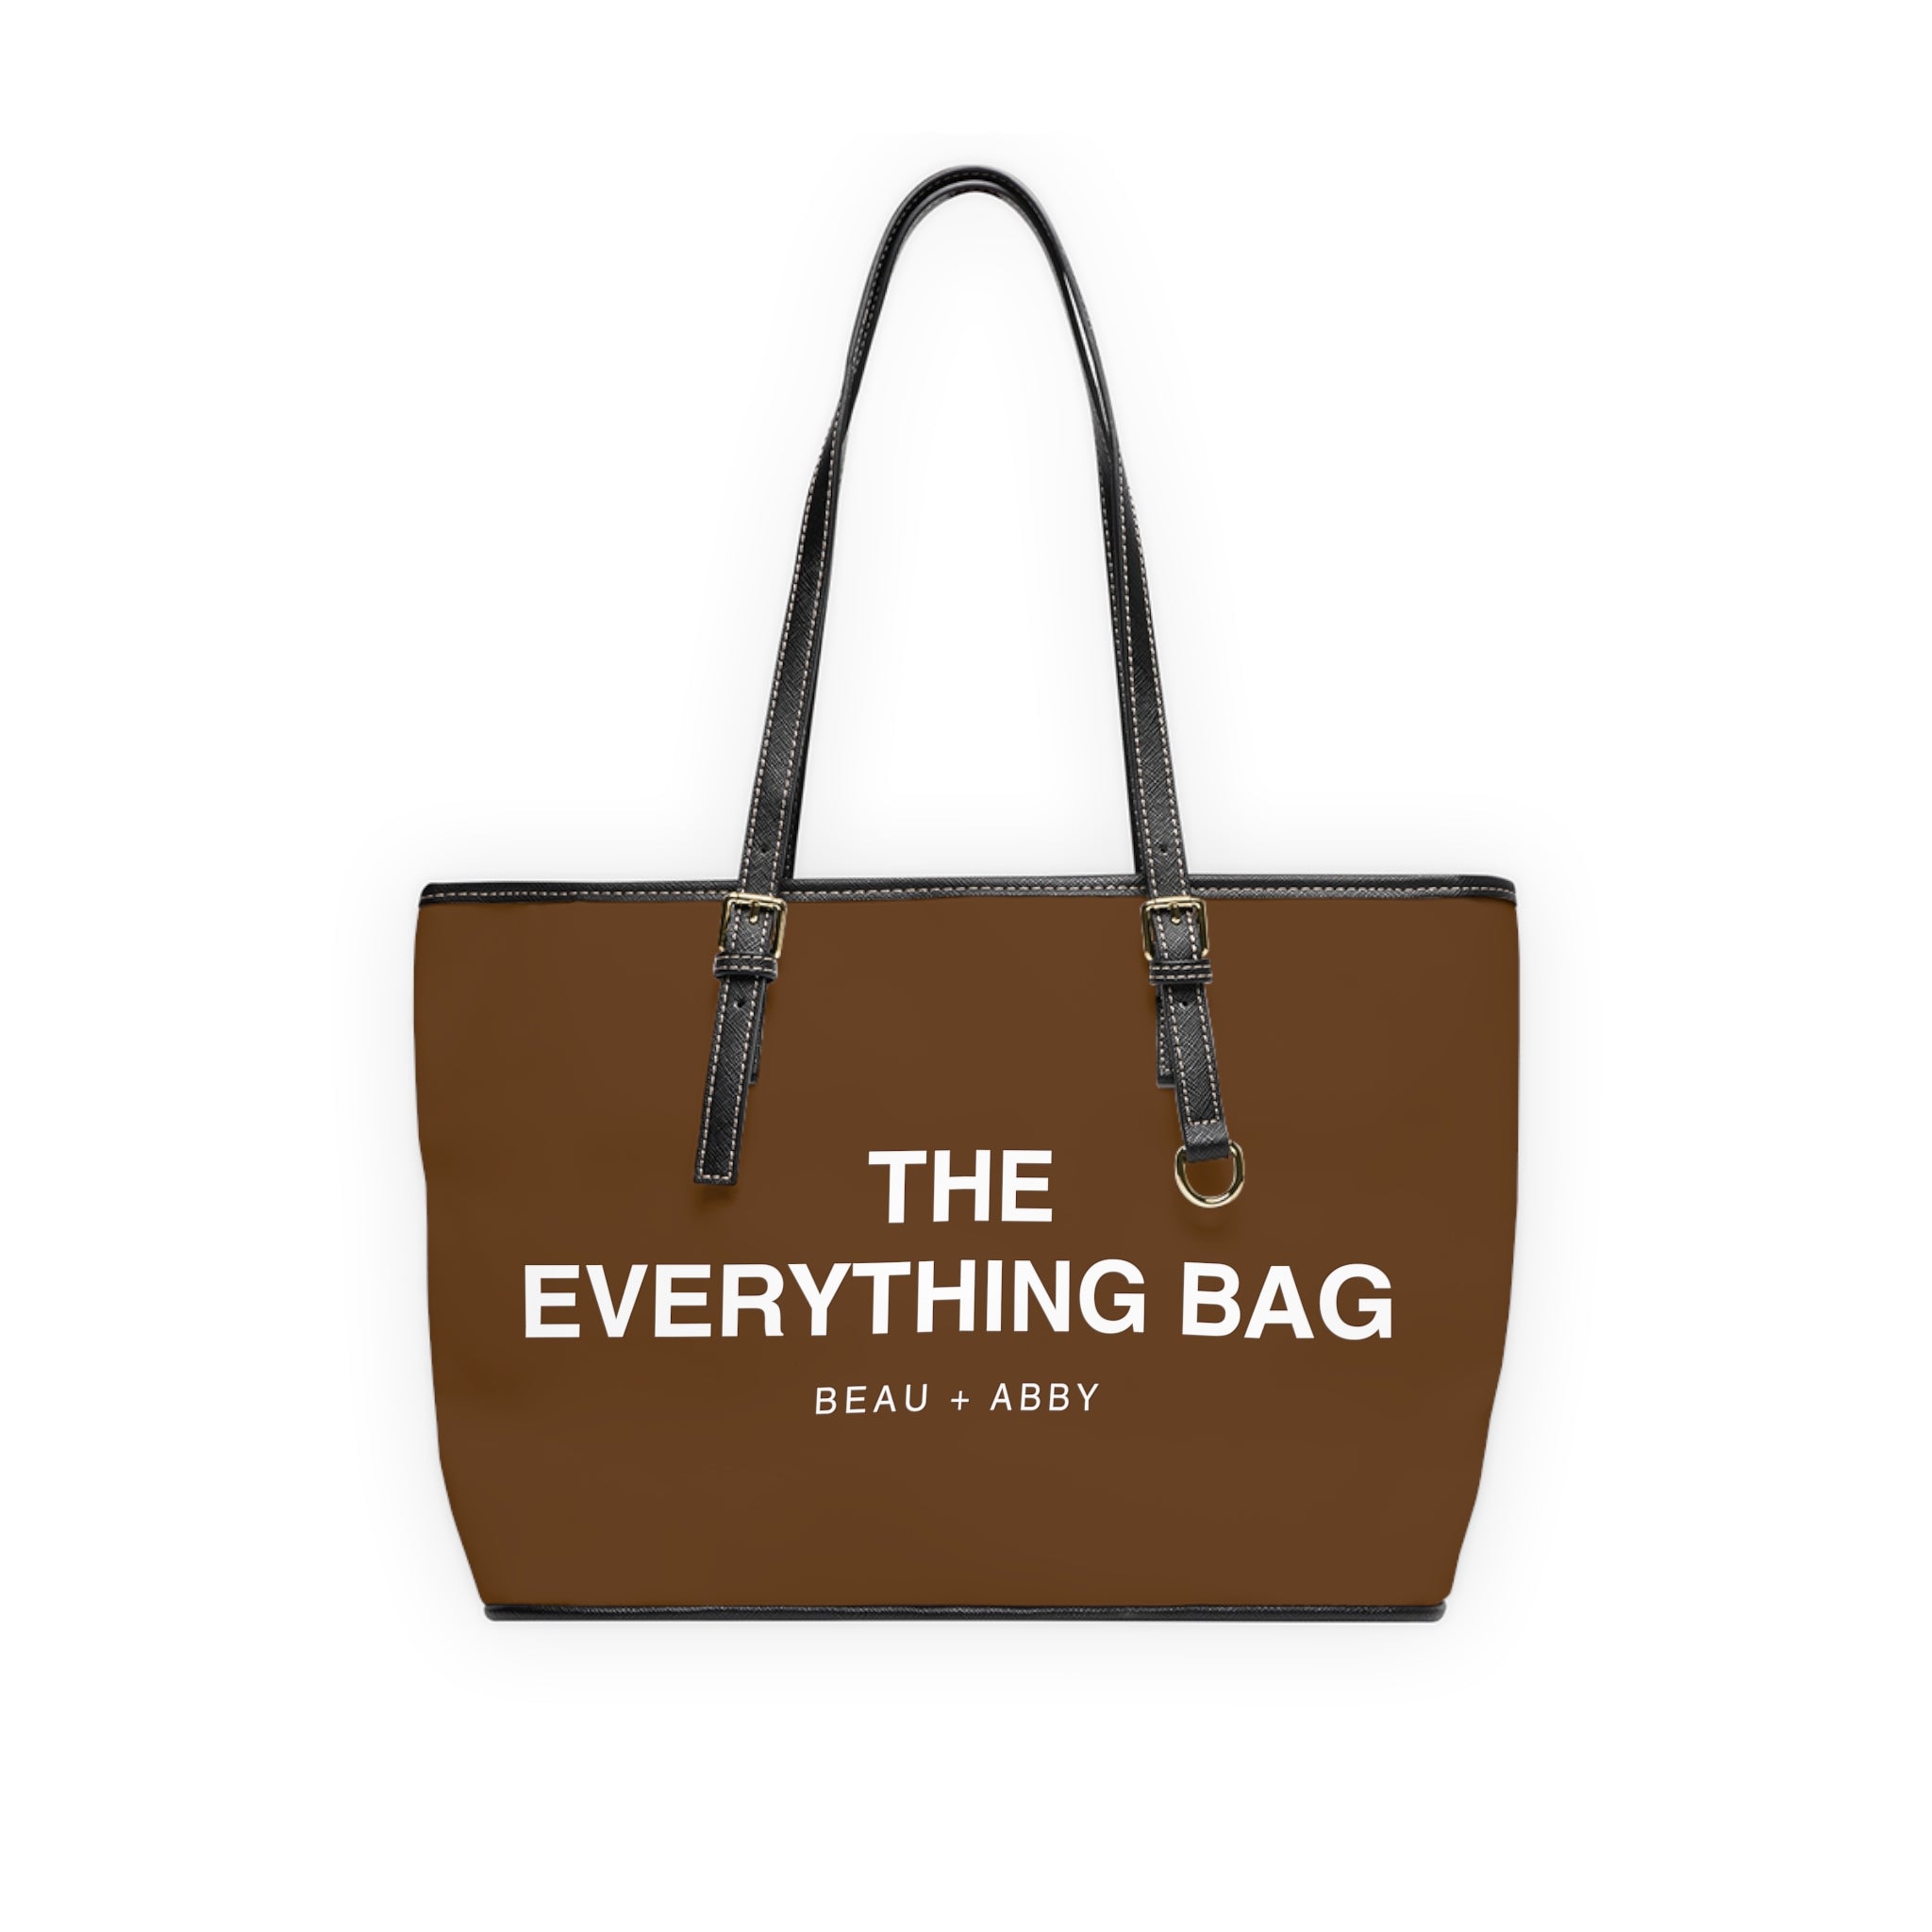 Casual Wear Accessories "Everything Bag" PU Leather Shoulder Bag in Dark Brown, Tote Bag, Weekend Tote, Gift For Her